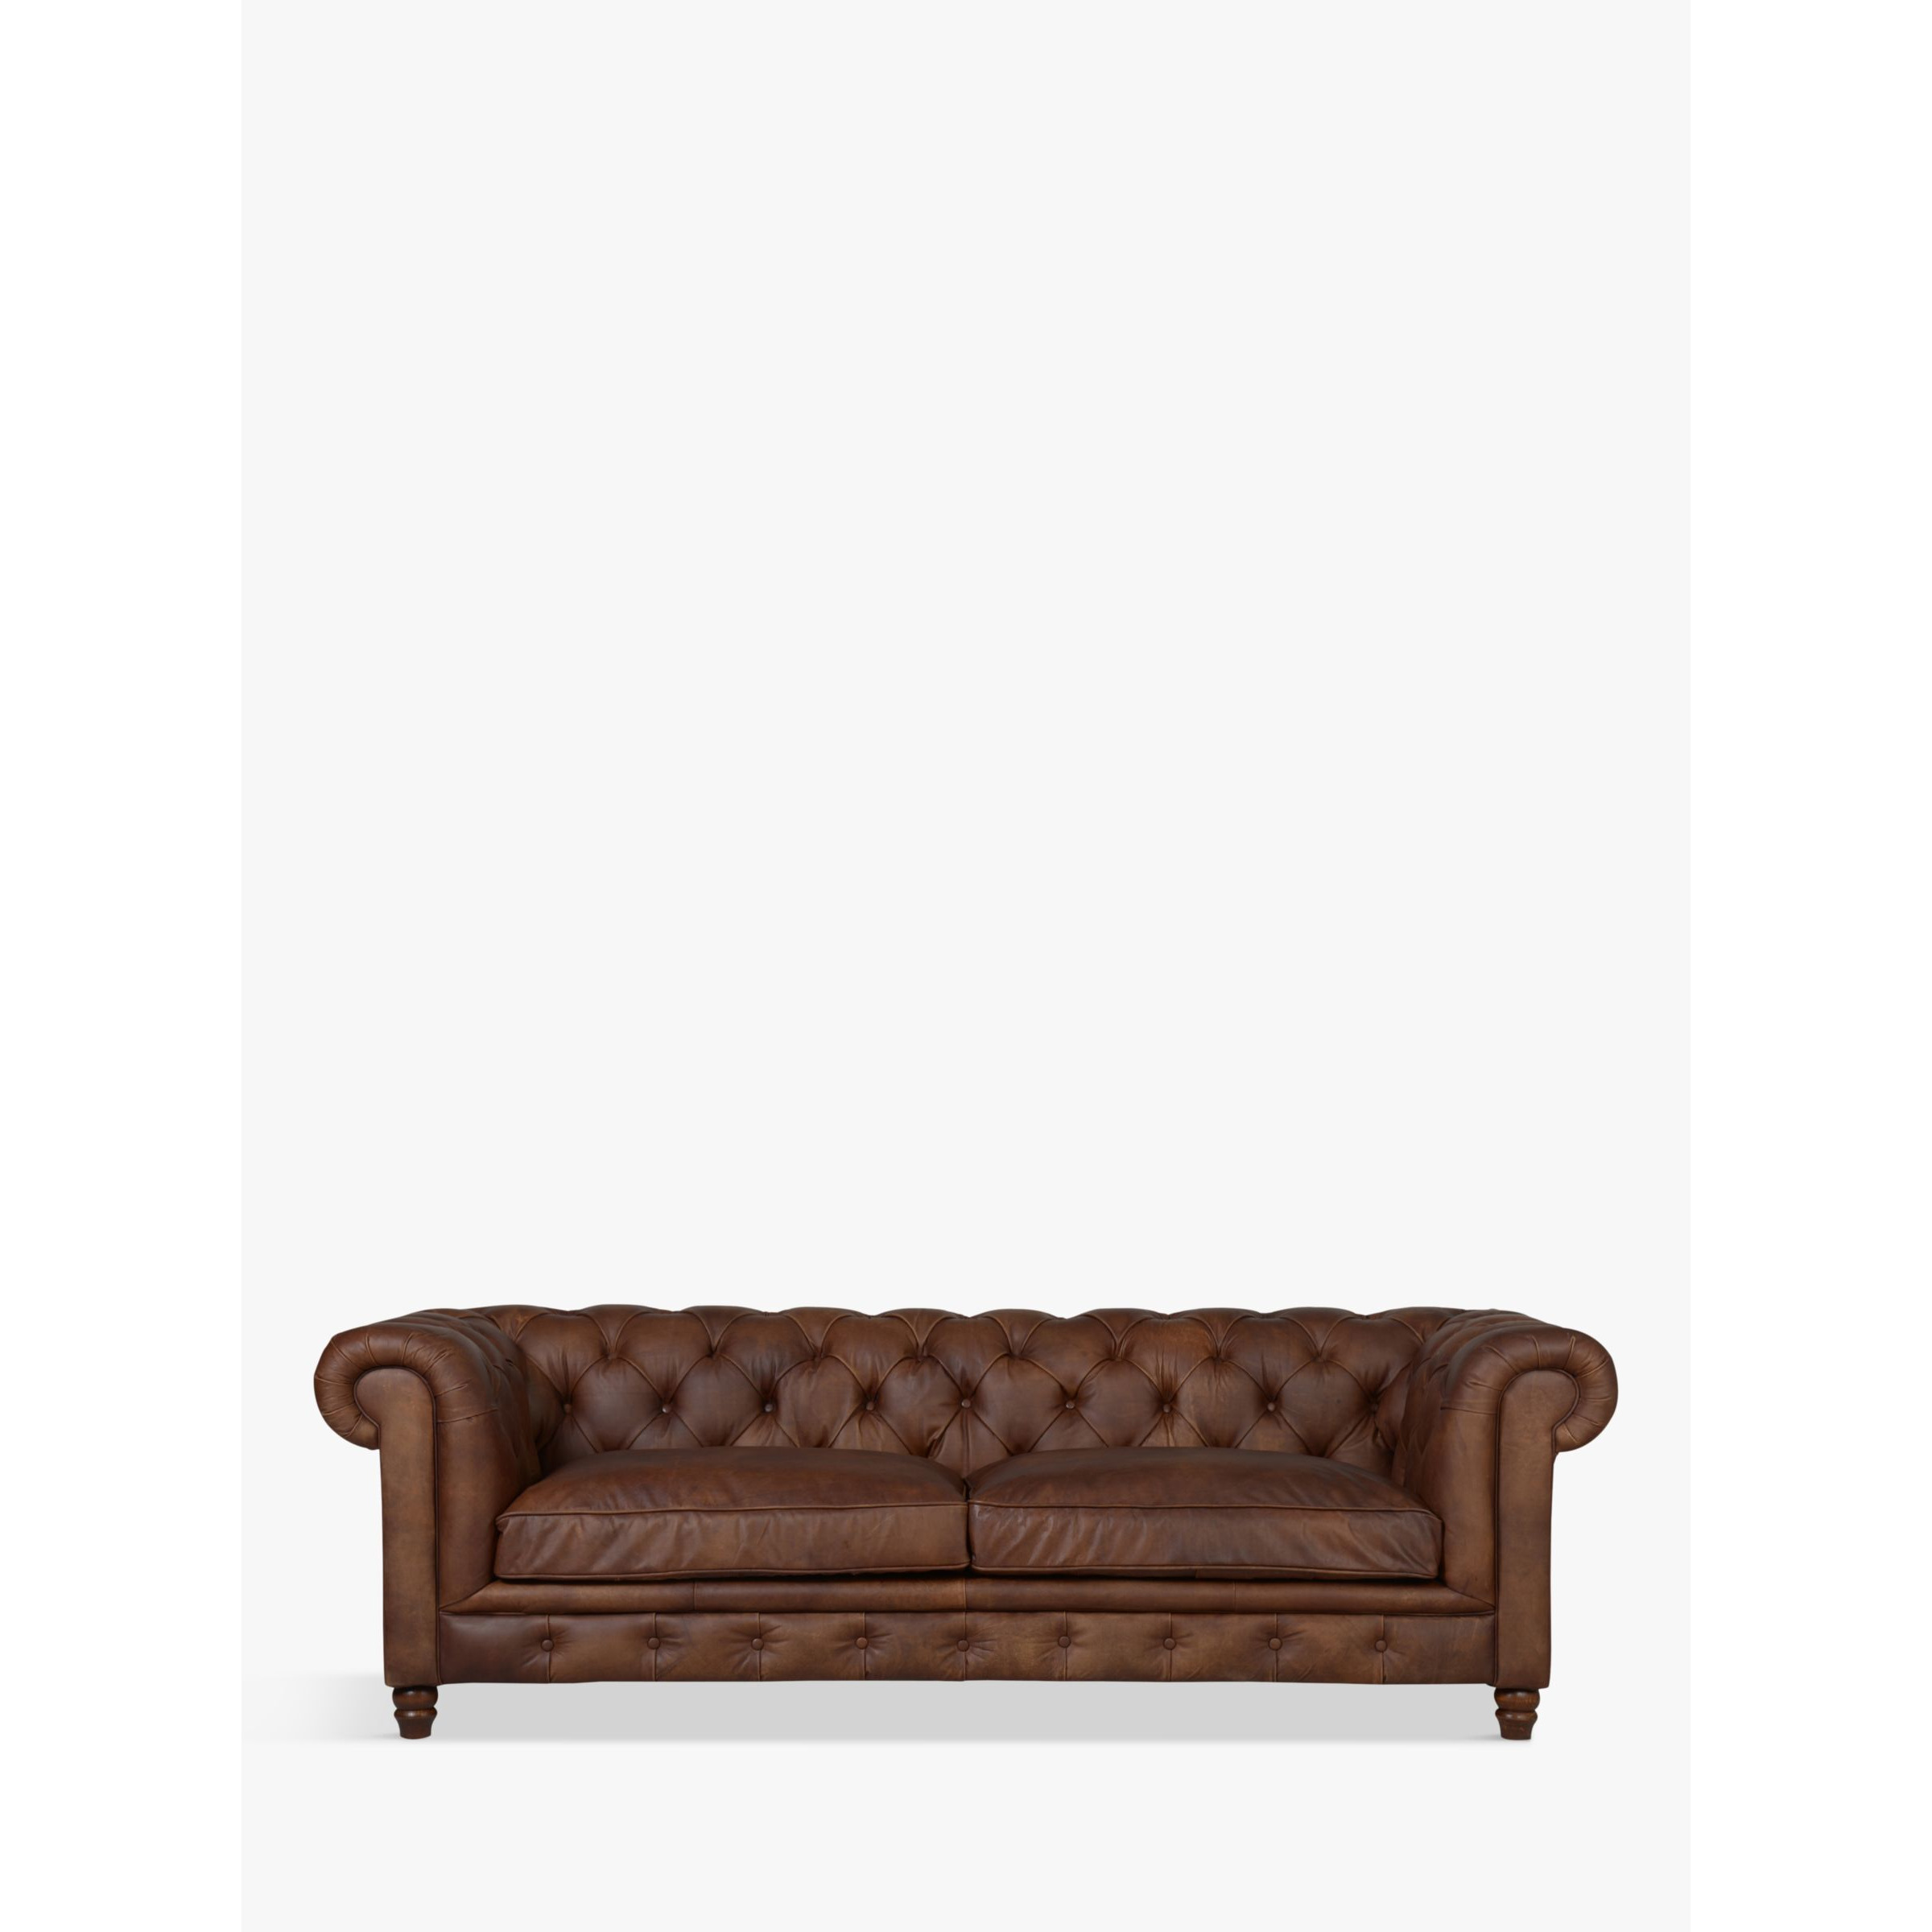 Halo Earle Chesterfield Grand 4 Seater Leather Sofa - image 1